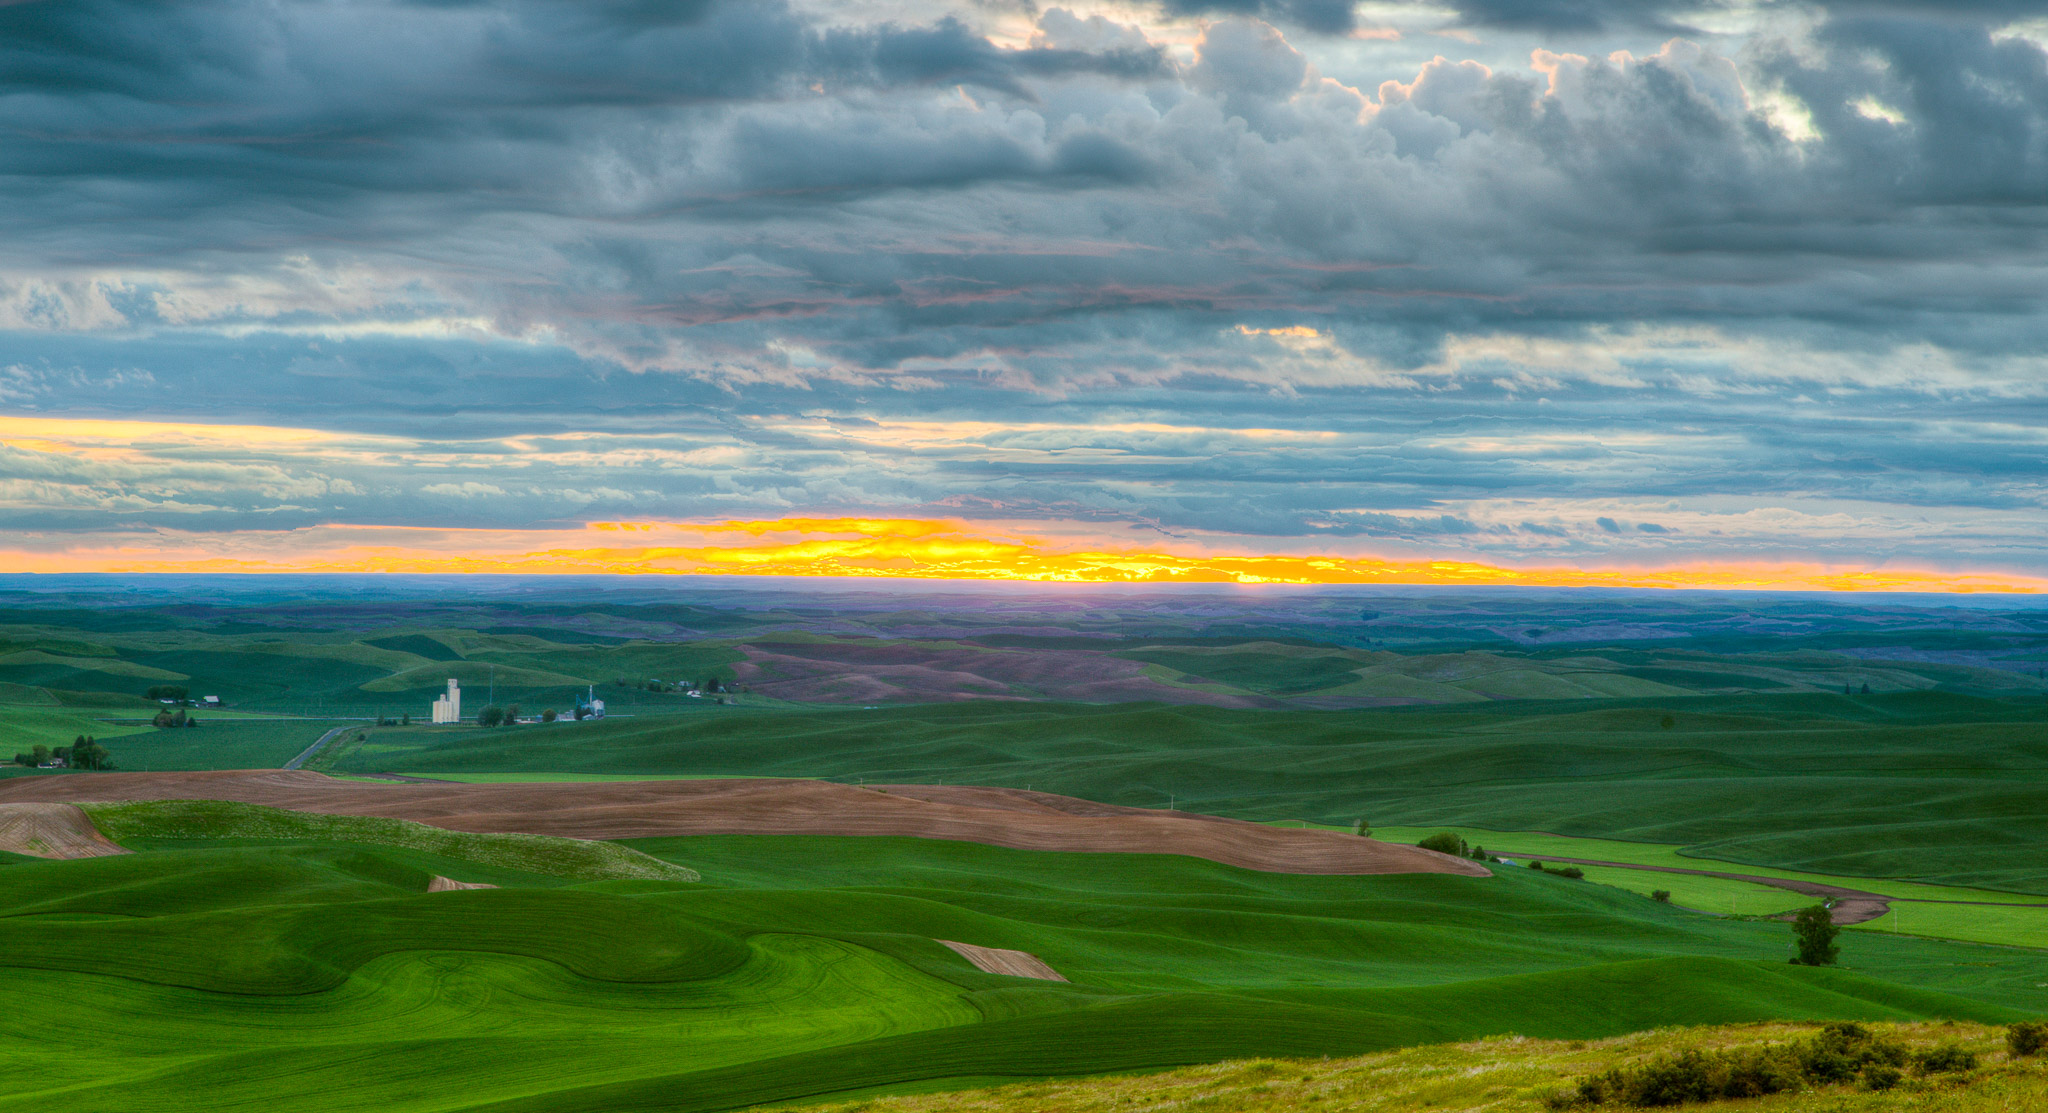 Sunset from Steptoe Butte, The Palouse